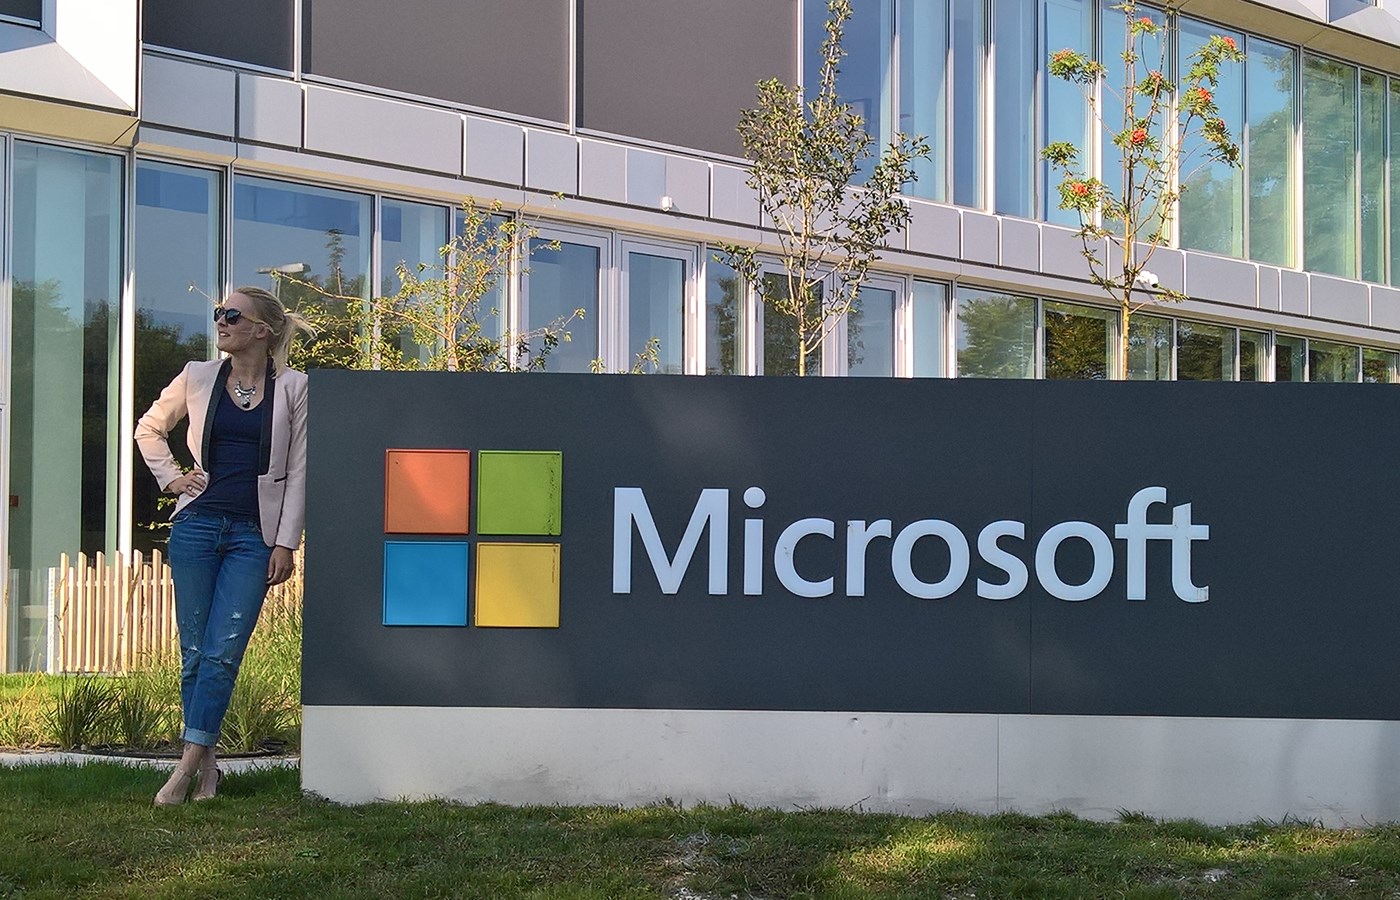 Stine Lund Johansen graduated in January 2017 and just got a job at Microsoft, where she also did her internship. Read her story about how she got the job.